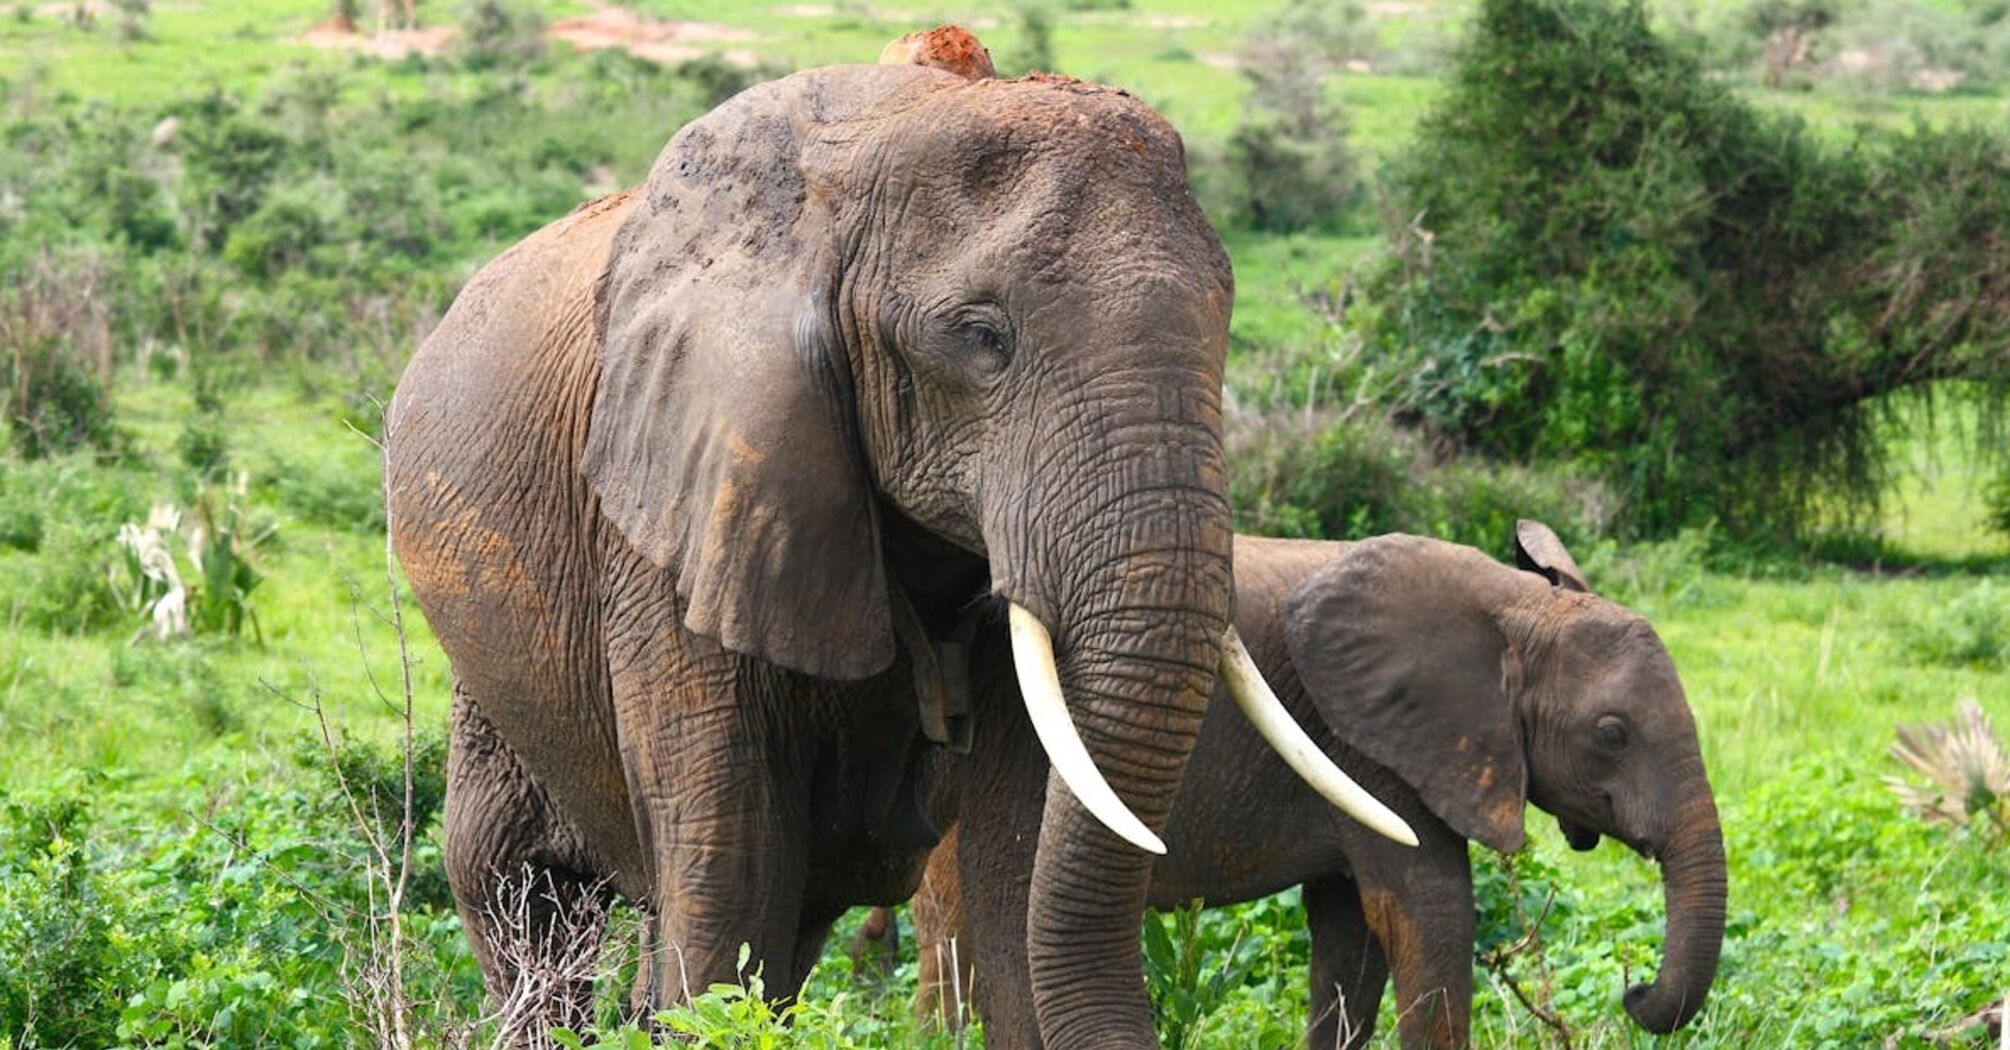 Elephants organize funerals for their dead babies and mourn them - scientists (photo)